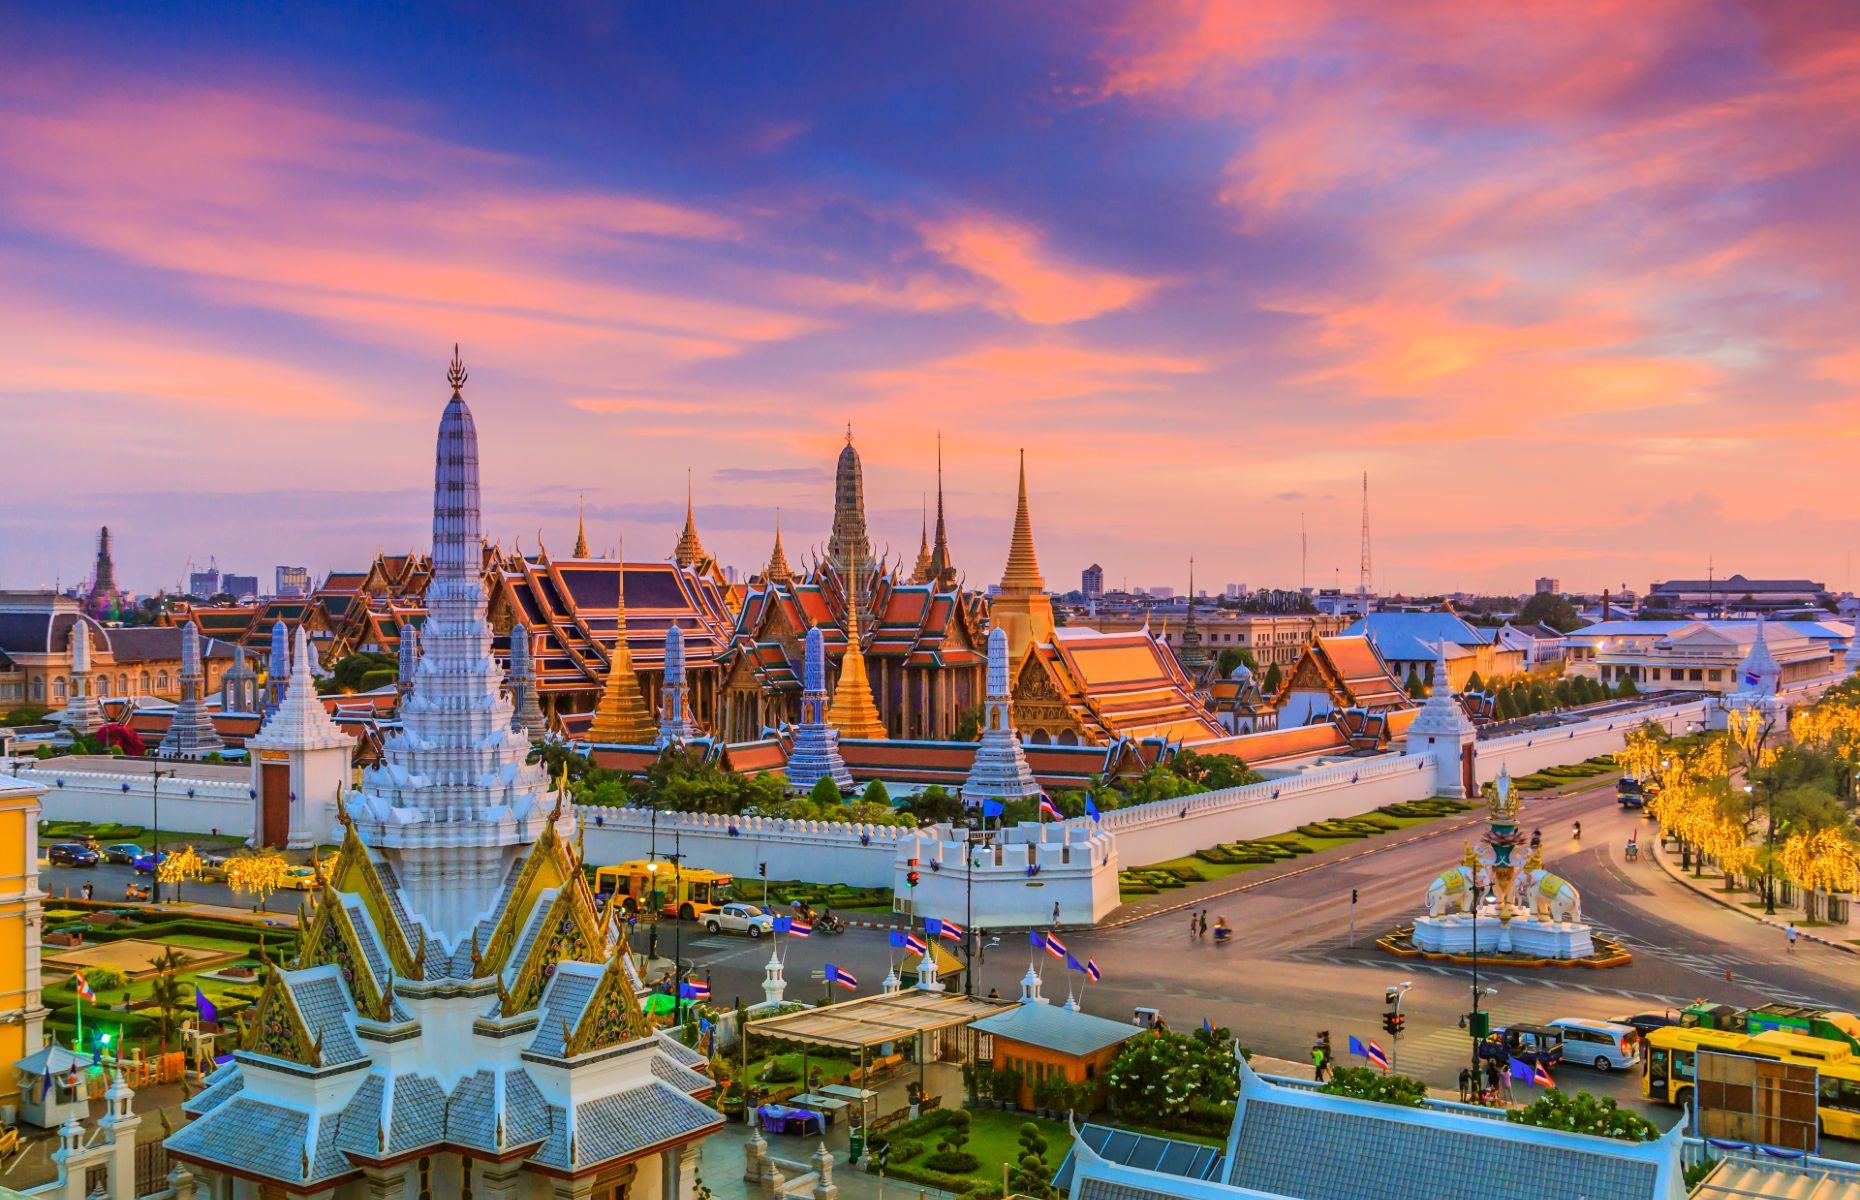 <p>With bustling cities, incredible beaches and historic architecture, it's no wonder Thailand is high on many people's wish lists. In fact the country welcomed 11.8 million tourists in 2022 and is expected to receive more than double that number over the course of 2023. But the country is keen to keep tourism sustainable, <a href="https://www.independent.co.uk/travel/news-and-advice/thailand-tourist-fee-plan-june-b2260812.html">so it has announced plans to introduce a tourism tax from June</a>. The 300 baht (£7.44/$9.10) fee will be collected from air travelers arriving in the country and will be used towards developing destinations, such as the Grand Palace in Bangkok (pictured), as well as taking care of tourists when health insurance doesn't cover them.</p>